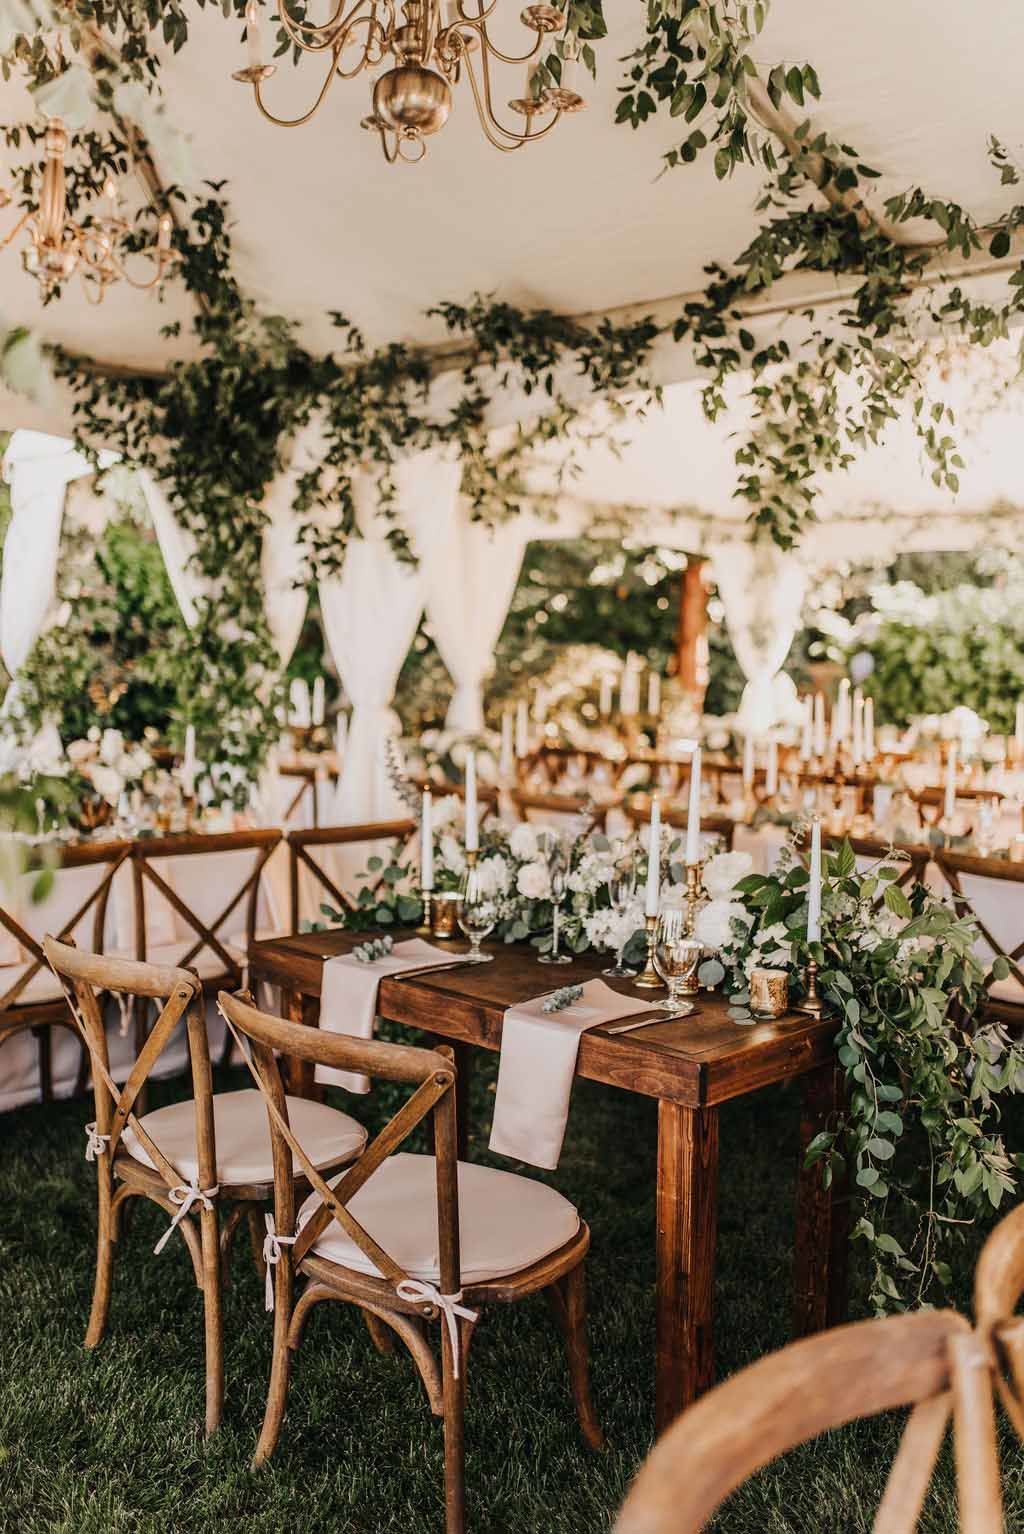 wooden sweet heart table covered in greenery in wedding tent with smilax greenery in ceiling